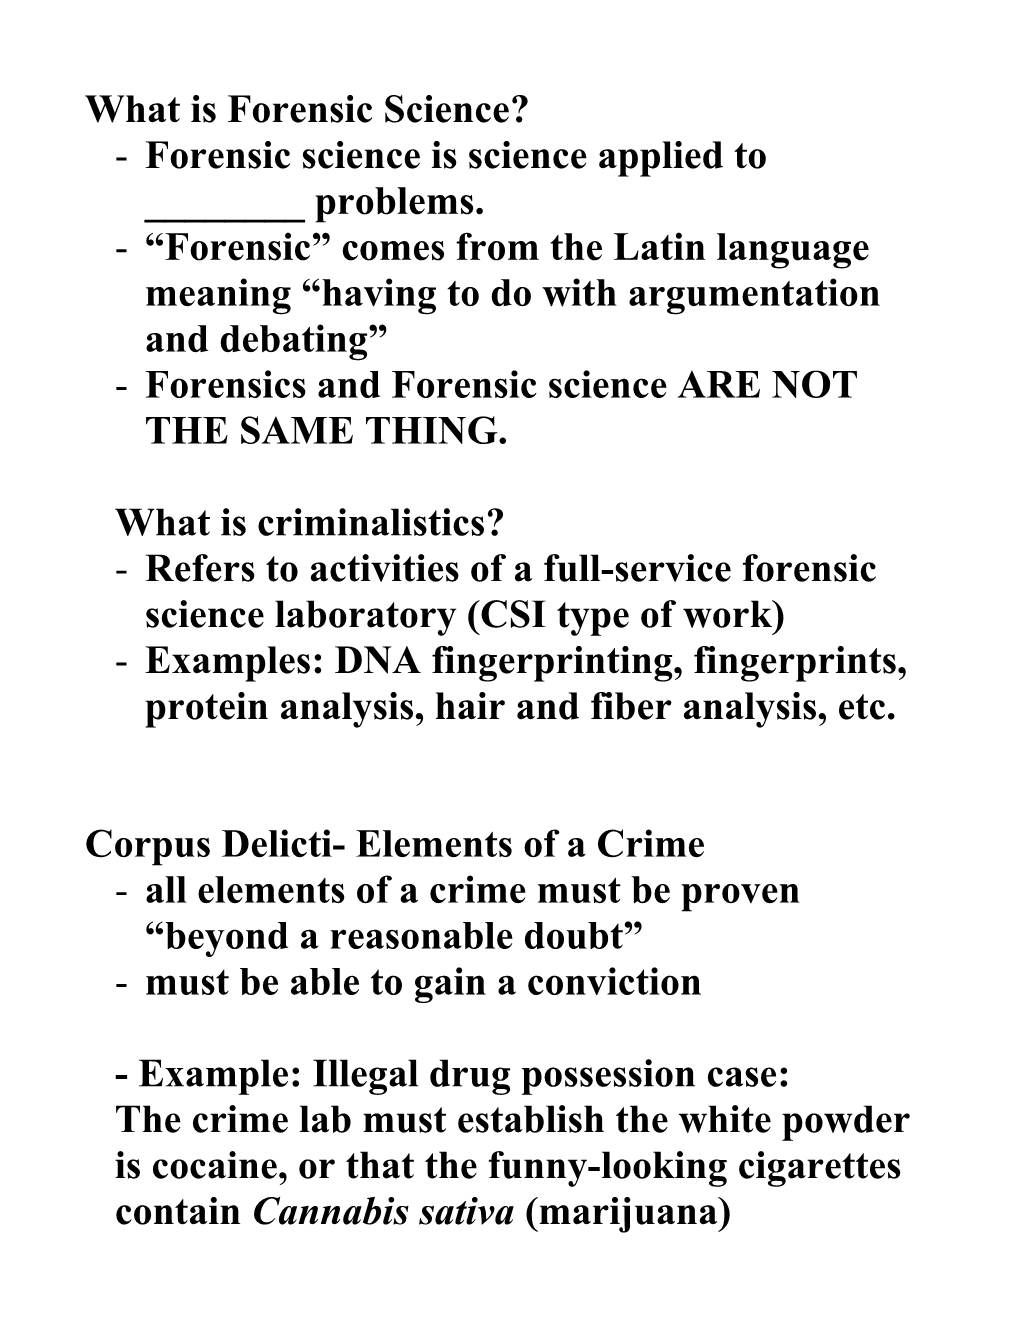 What Is Forensic Science?